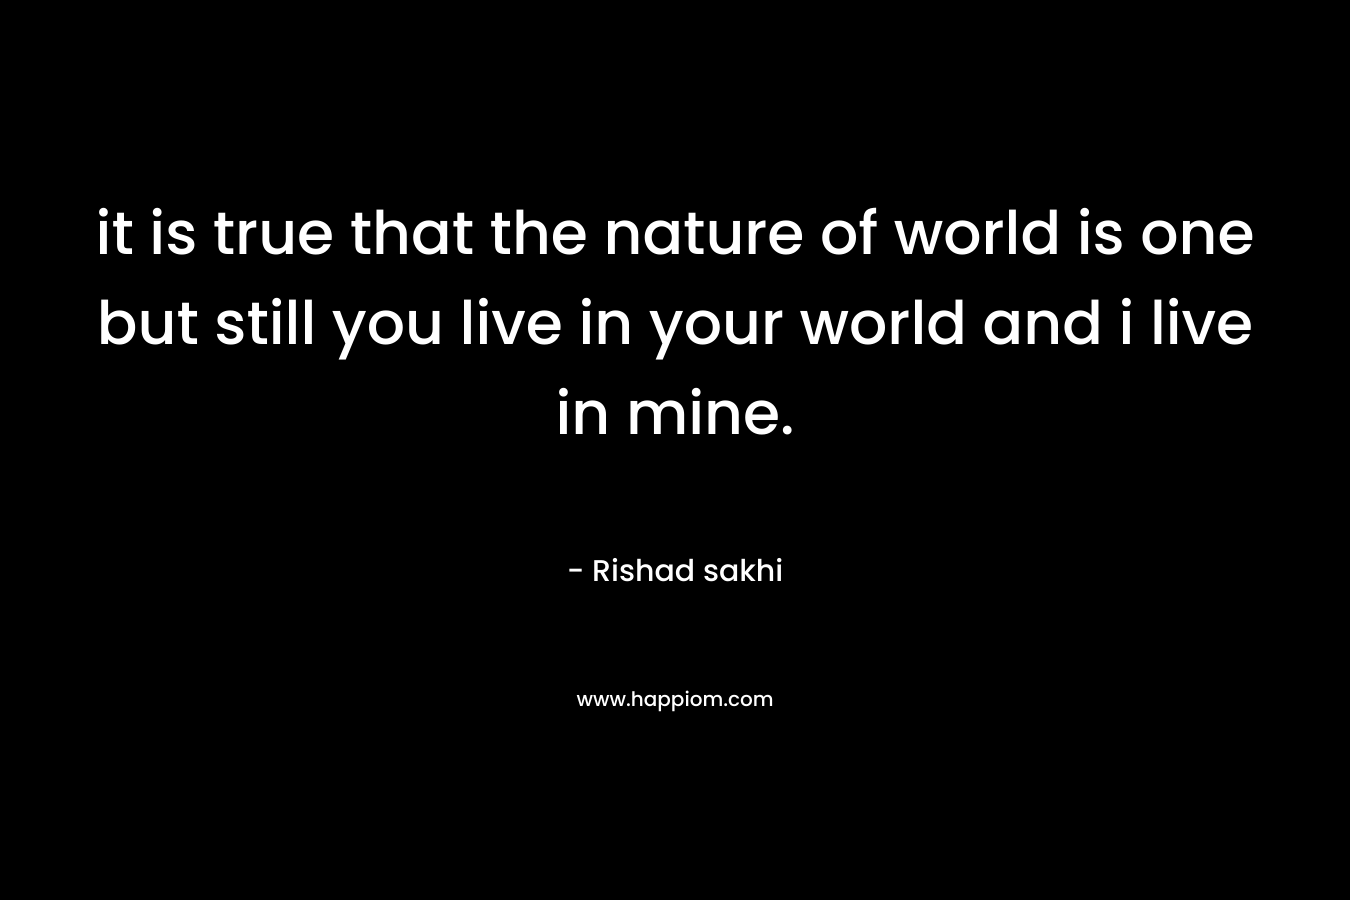 it is true that the nature of world is one but still you live in your world and i live in mine.